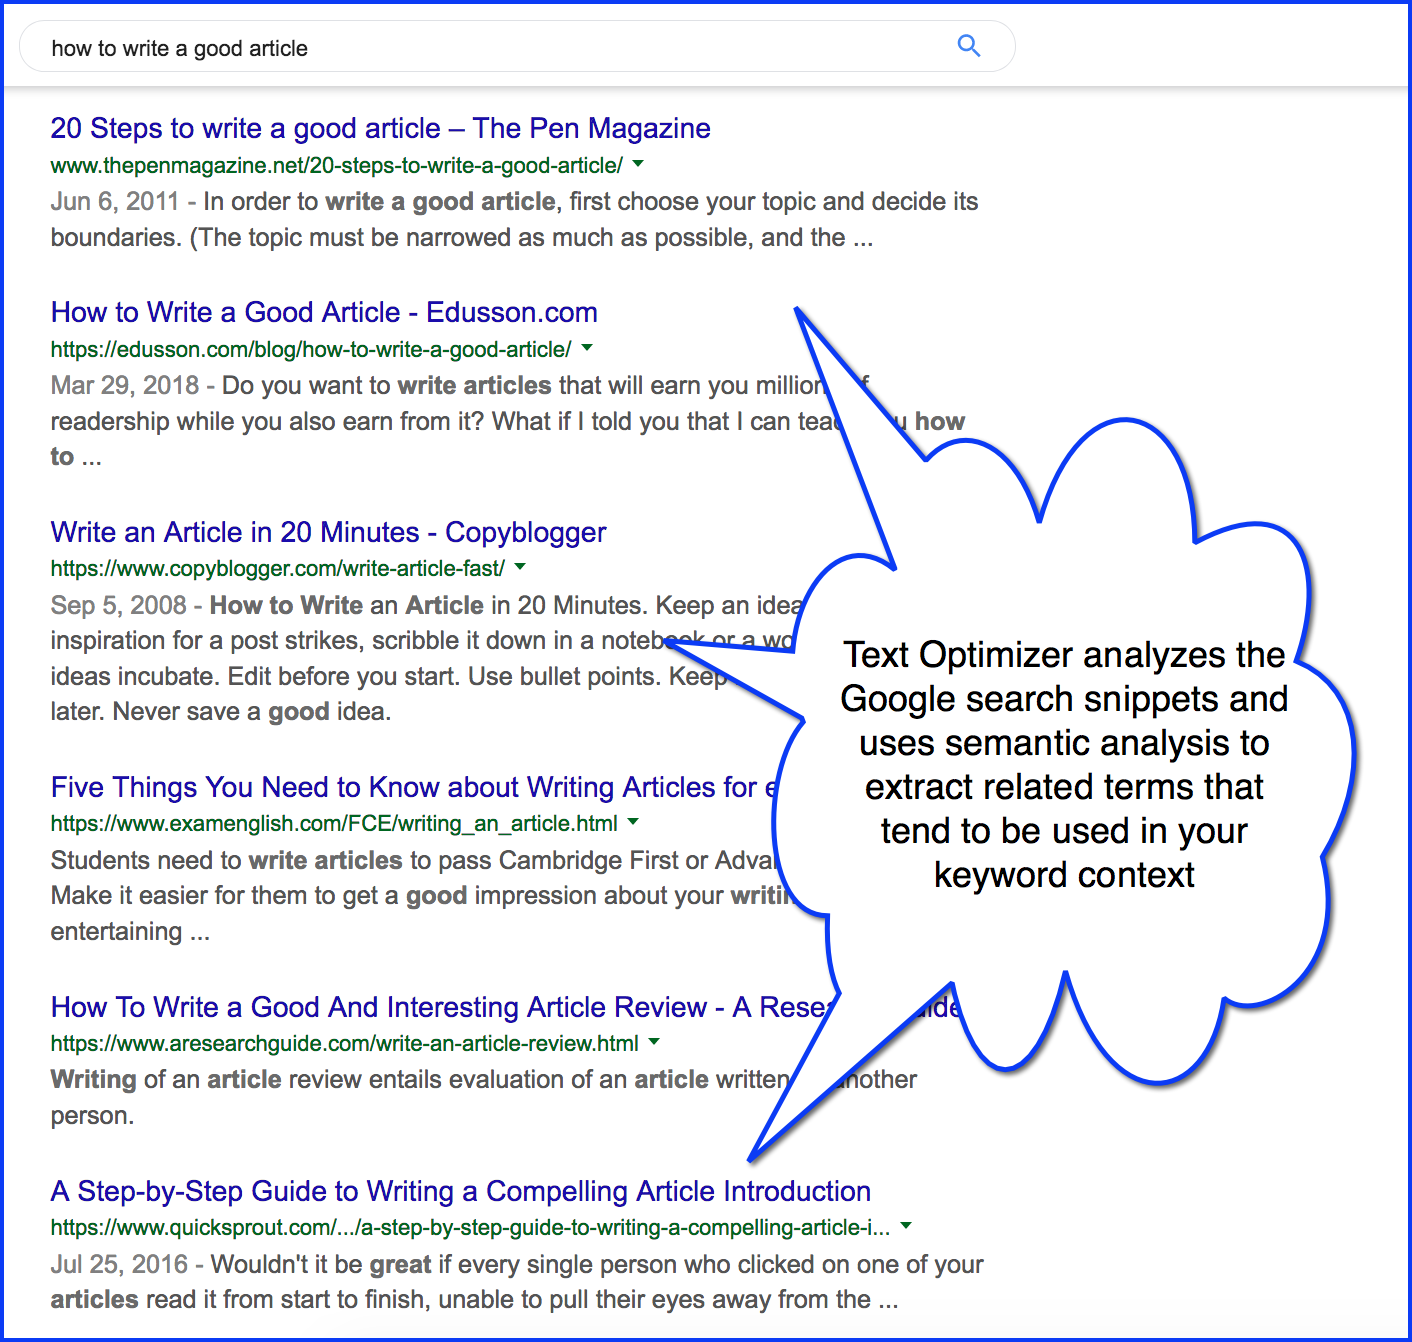 search snippets for [how to write a good article]